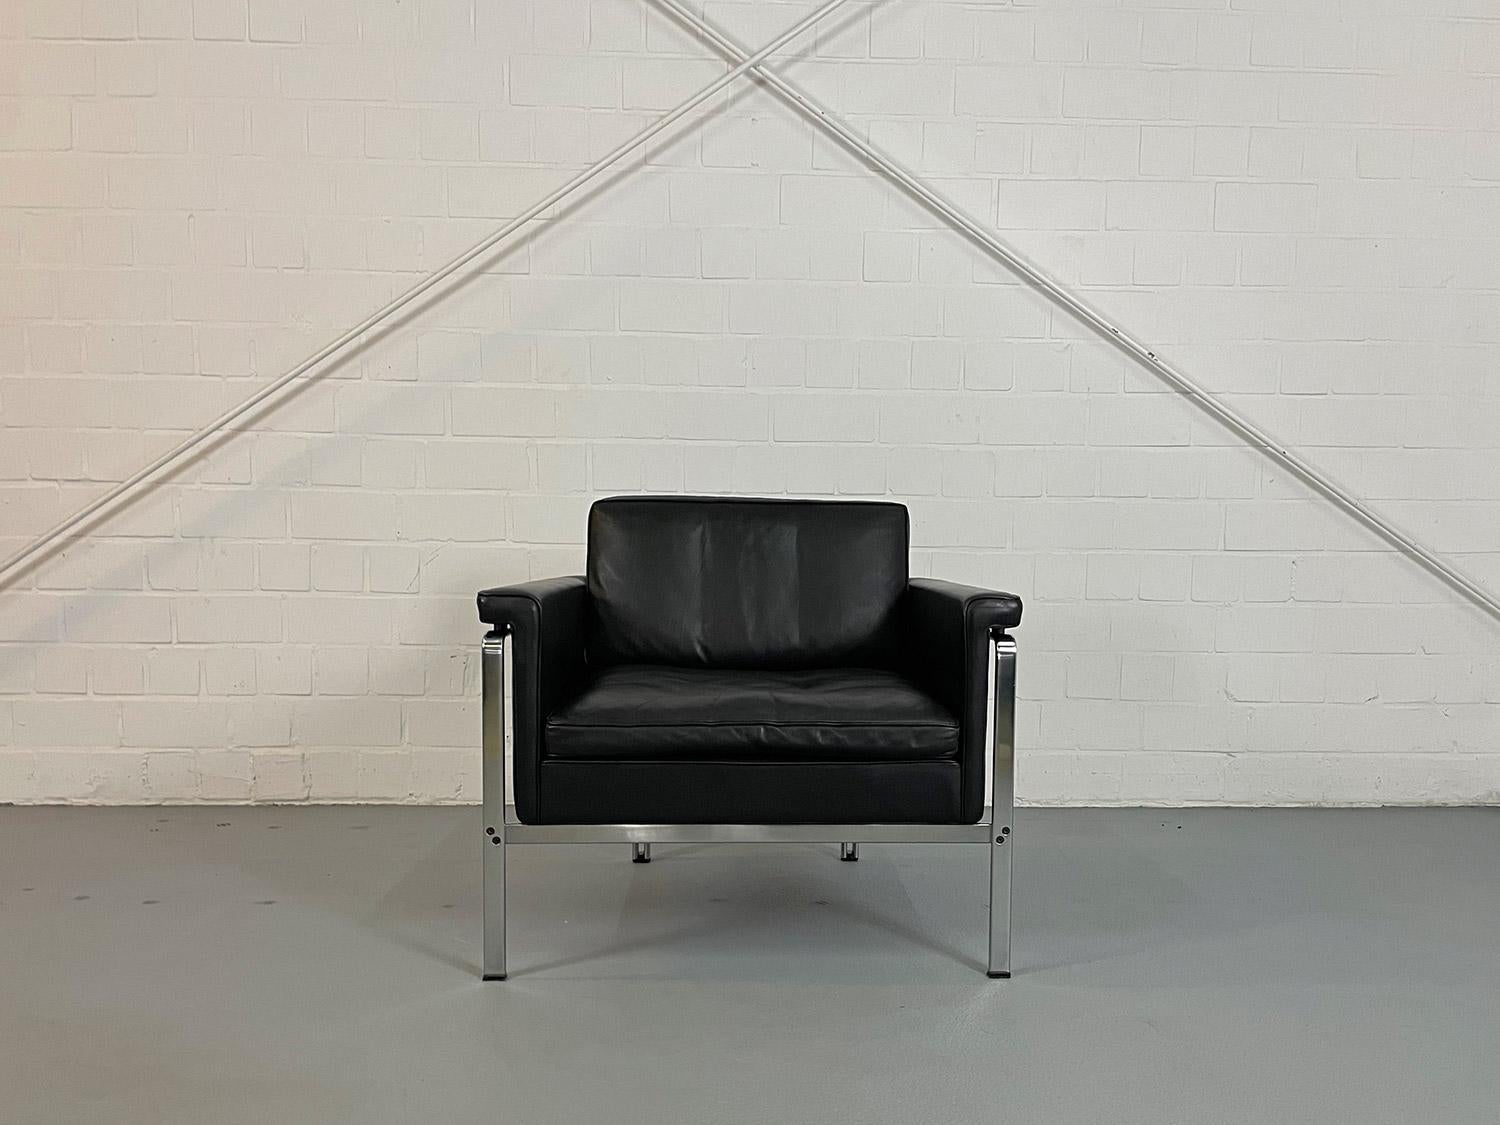 Black leather armchair designed by Horst Brüning for Kill International in the 1960s. Due to the great design of the armchair, it can be wonderfully combined with existing design classics by Preben Fabricius, Jorgen Kastholm, Paul Kjaerholm or Mies